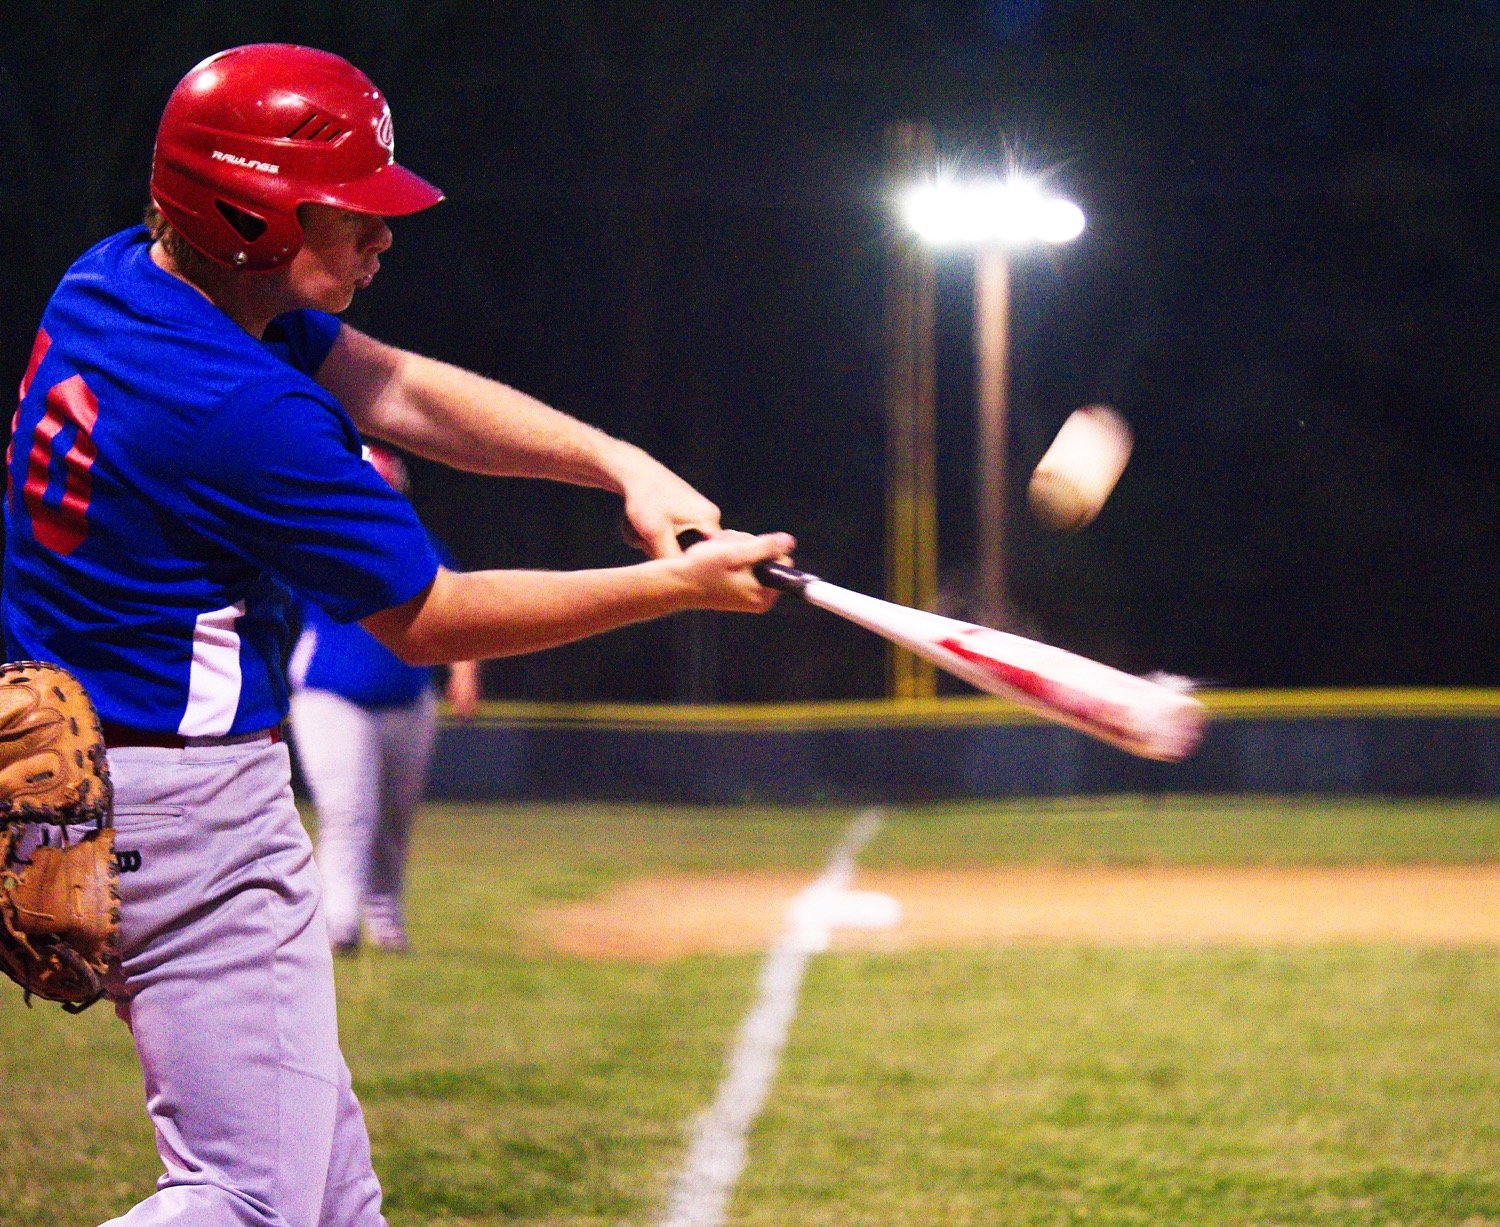 Blake Weissert makes contact against the North Hopkins pitcher.